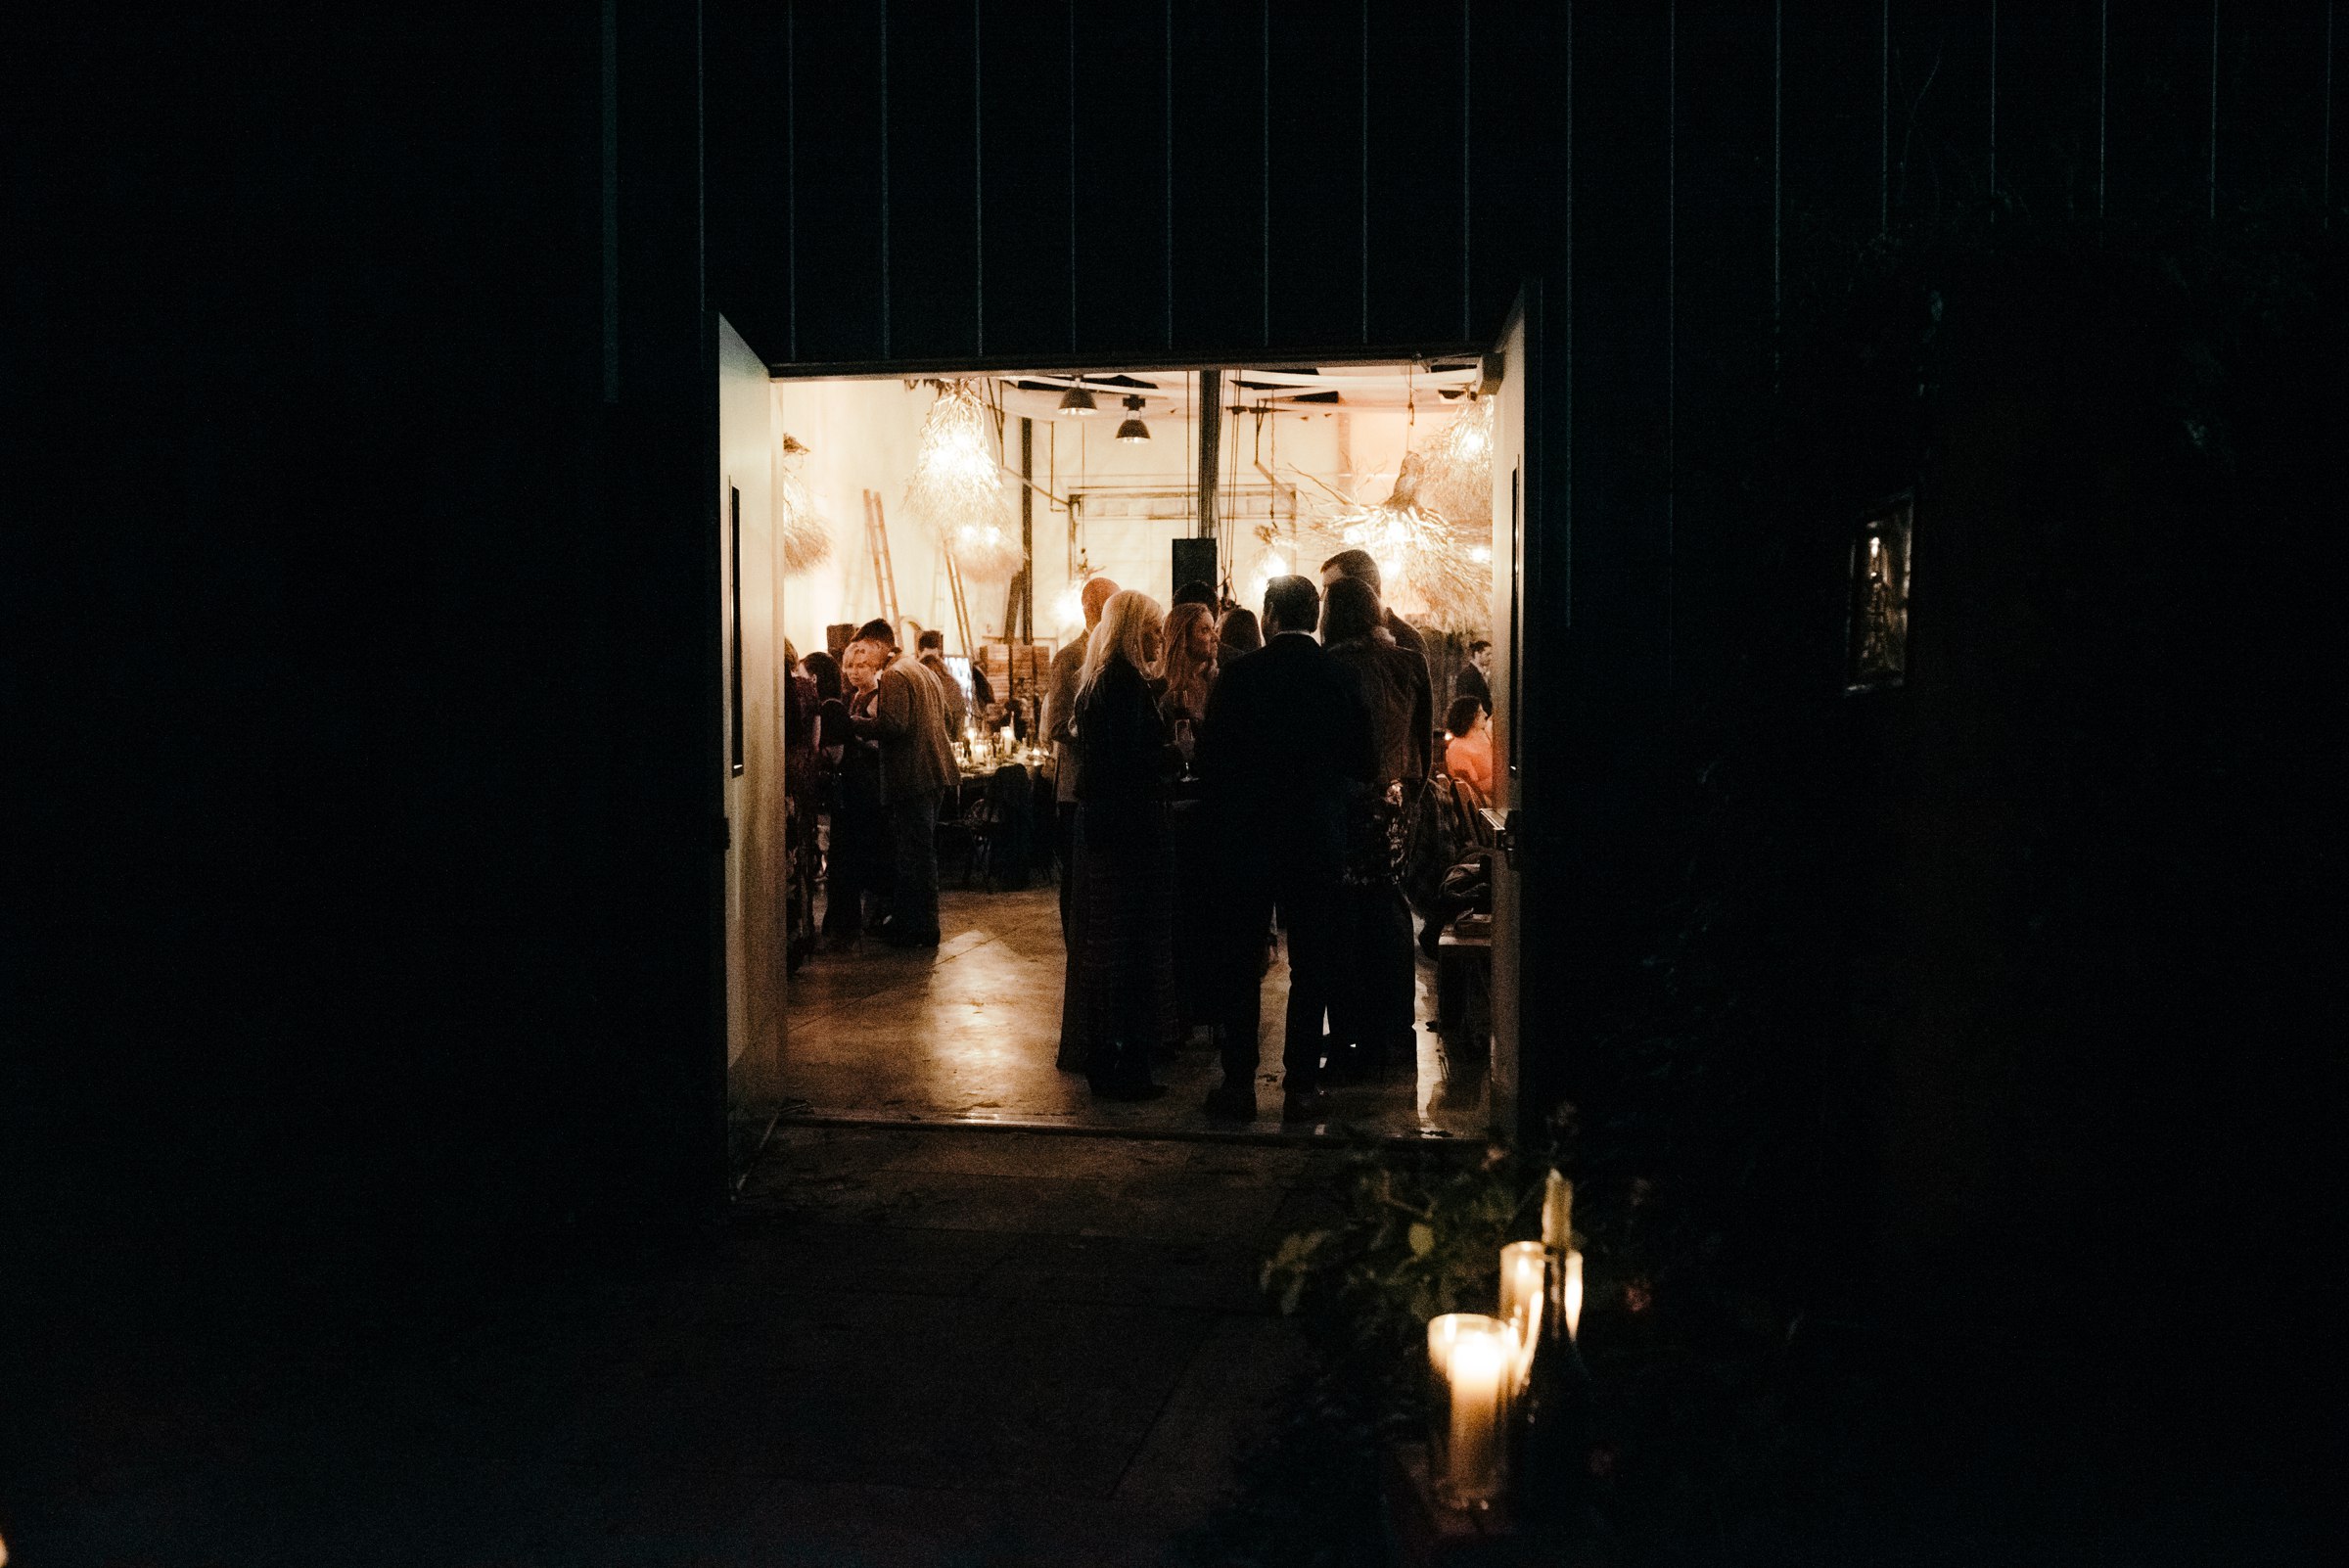  guests mingling inside vuka collective austin texas during wedding 